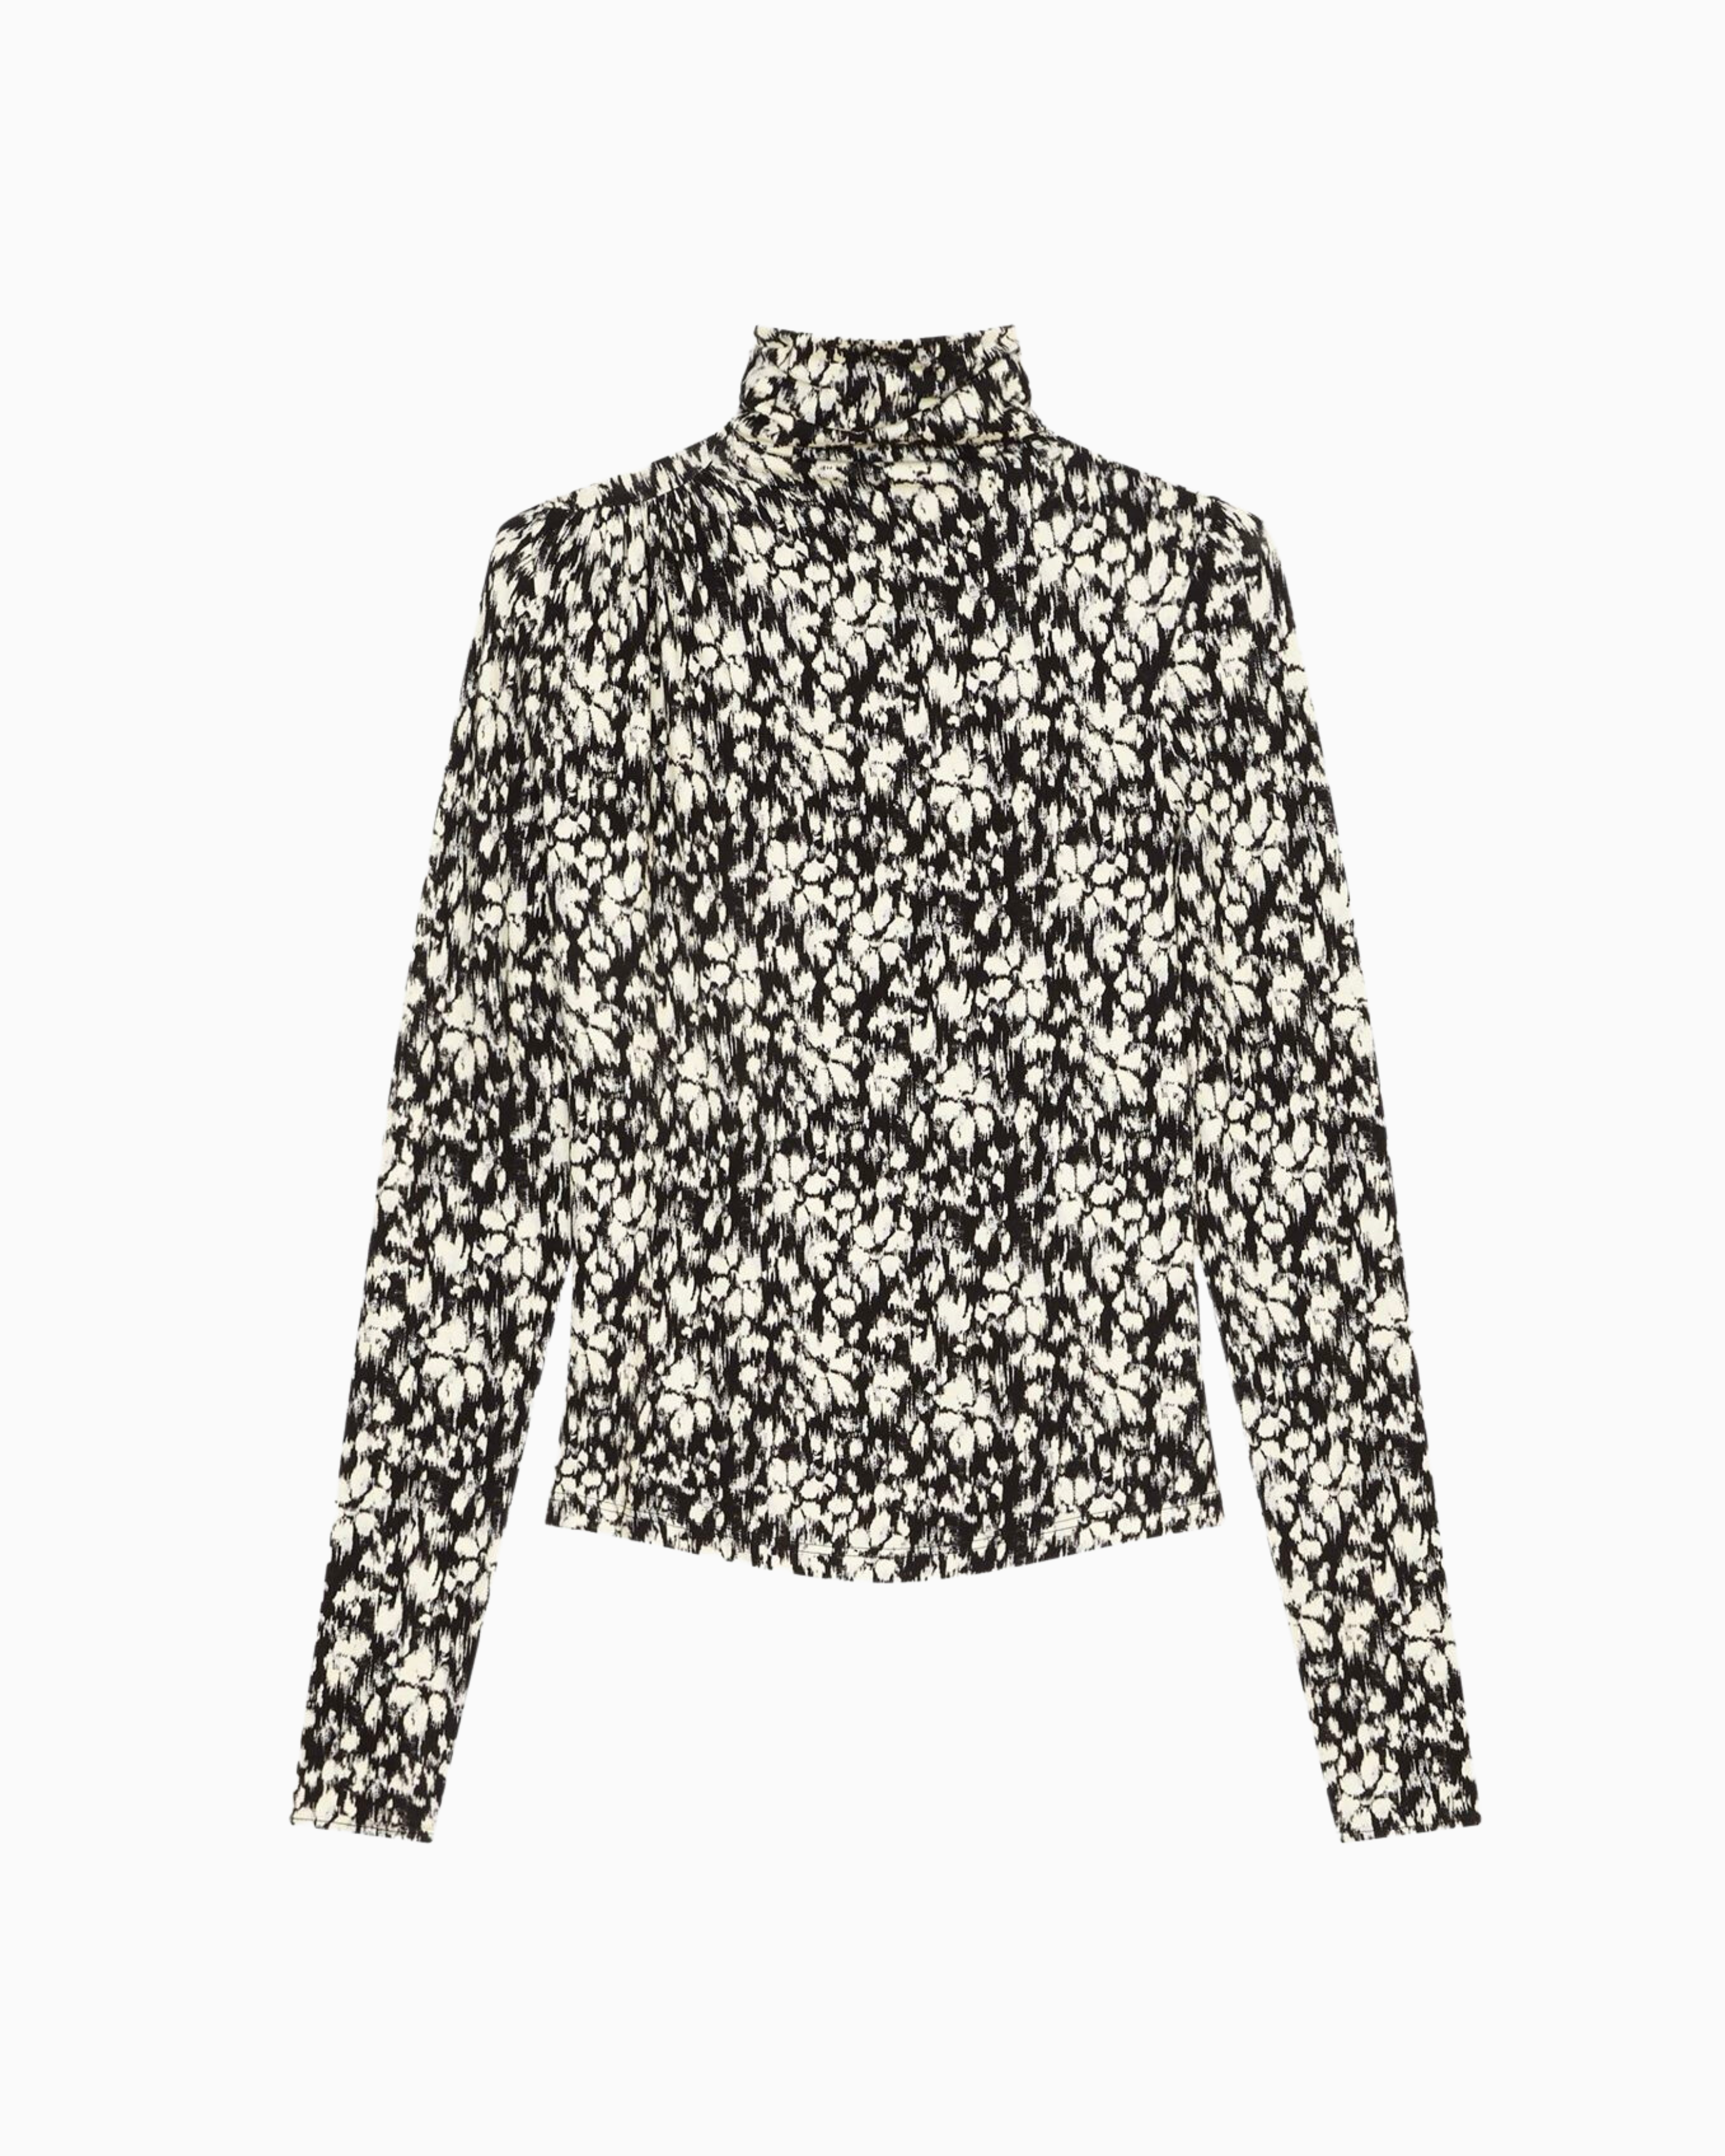 Isabel Marant Lou Top in Black and White Floral